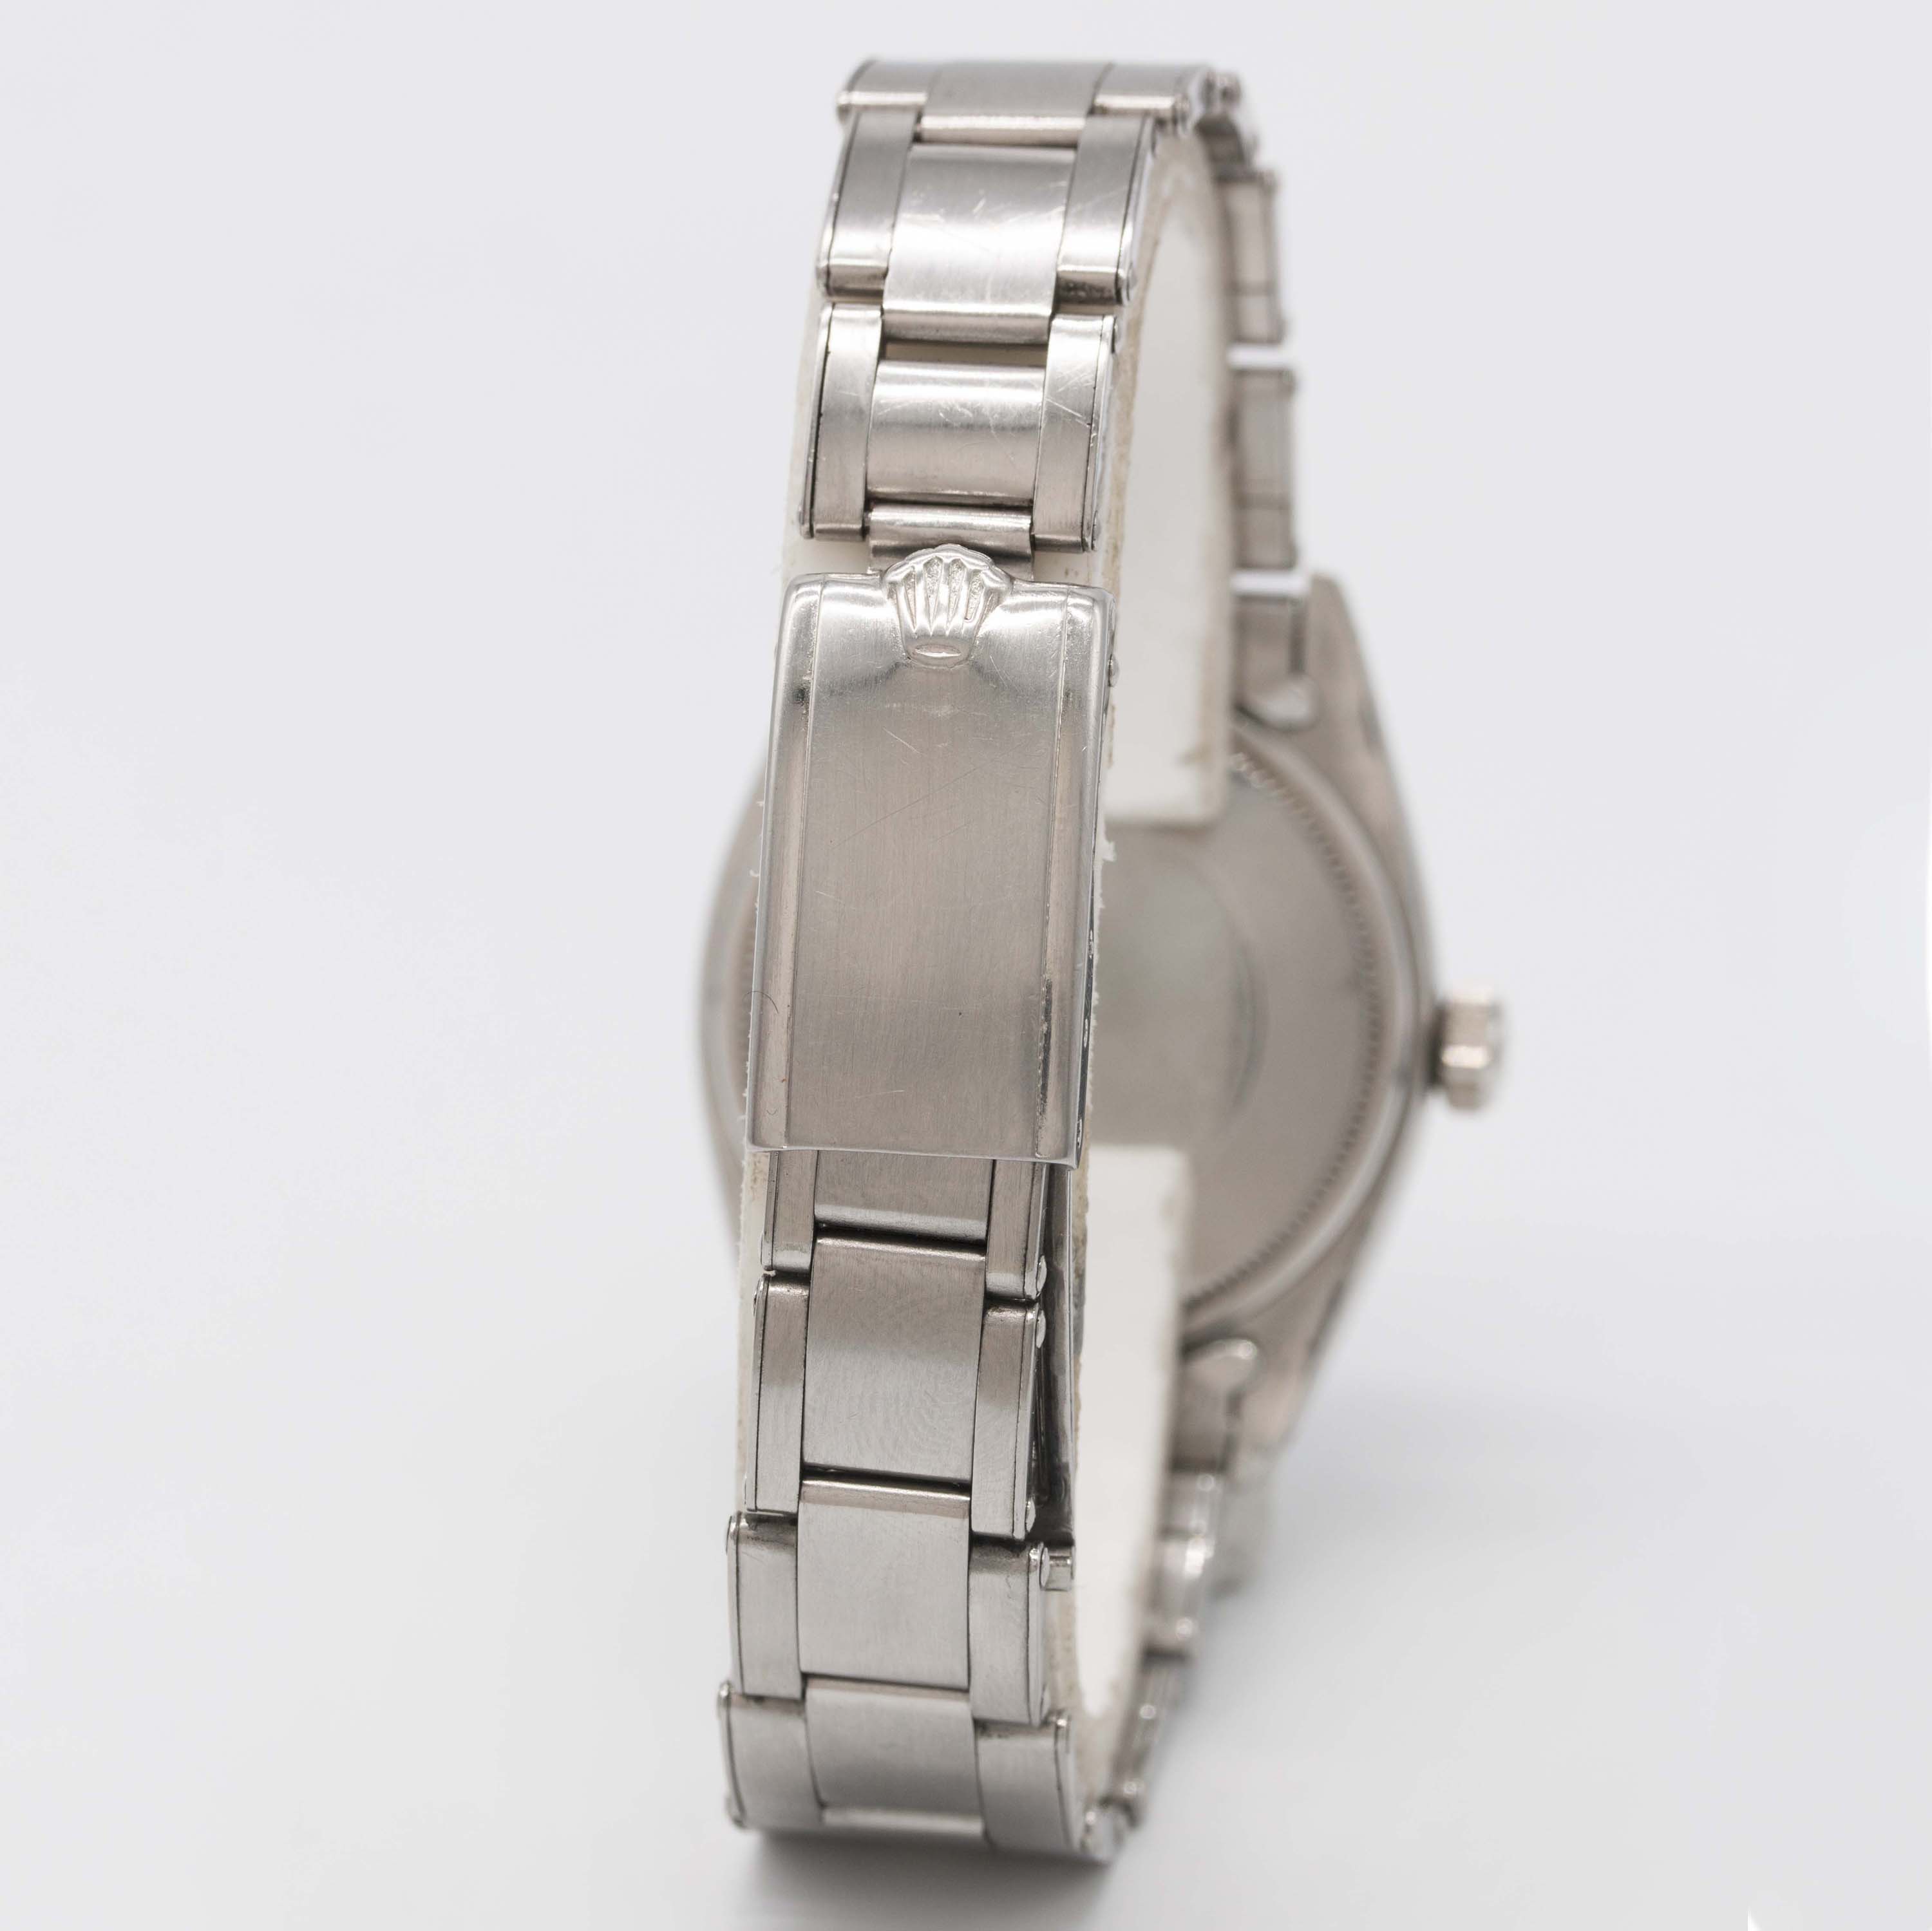 A GENTLEMAN'S STAINLESS STEEL ROLEX OYSTER PERPETUAL DATE BRACELET WATCH CIRCA 1961, REF. 1500 GLOSS - Image 6 of 12